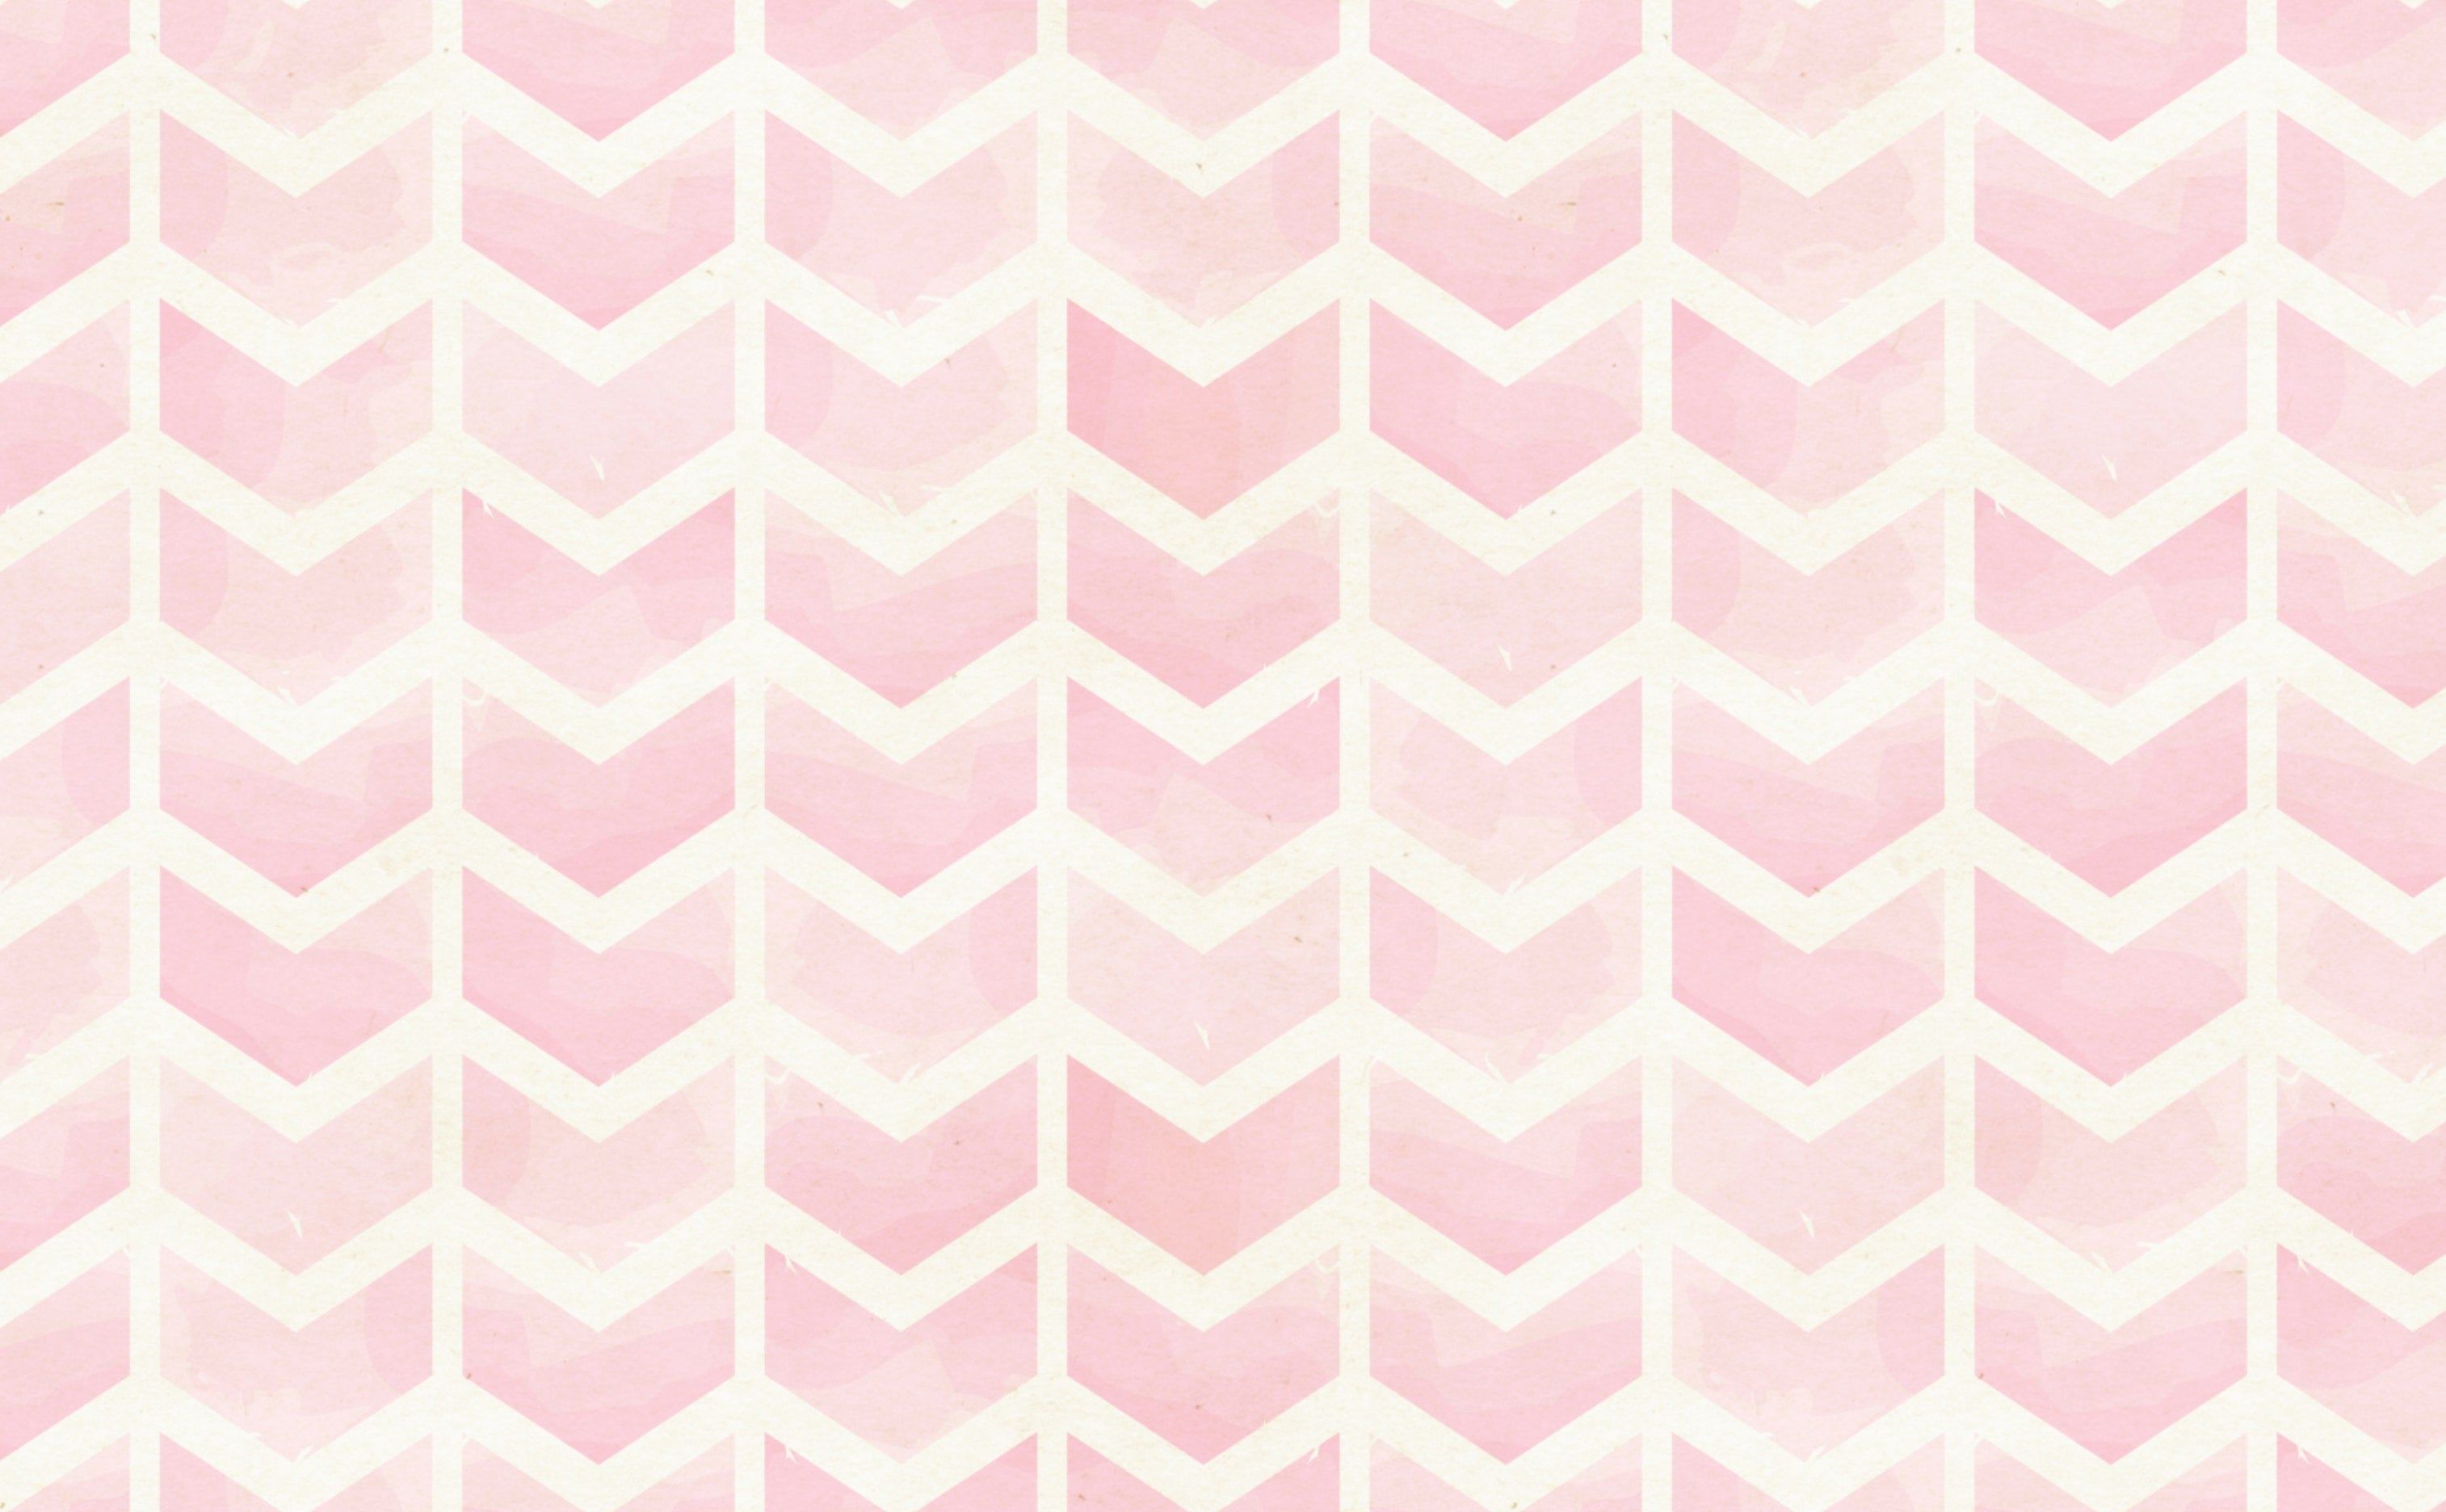  Rosa Hintergrundbild 3028x1872. Try Ultra Chic and Aesthetic Pink Wallpaper Collection